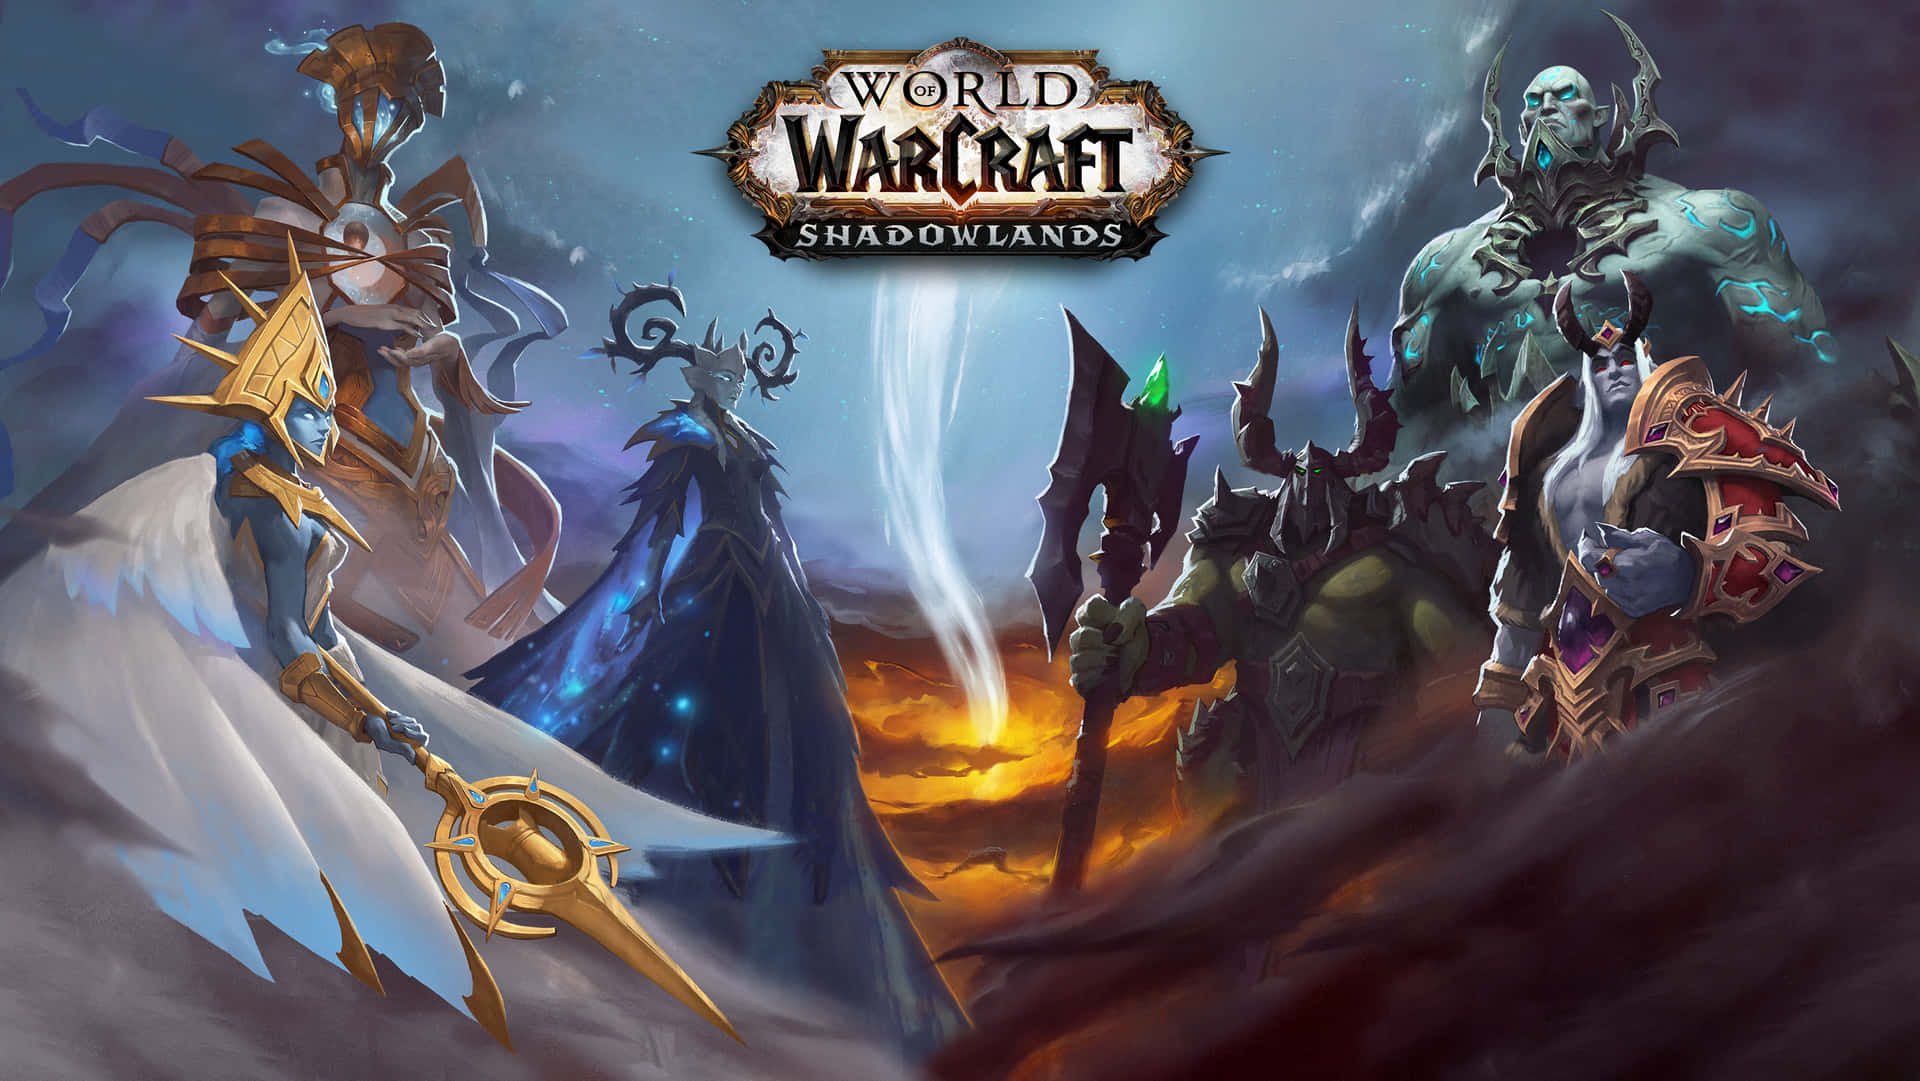 “Explore the World of Warcraft Shadowlands in stunning graphics.” Wallpaper